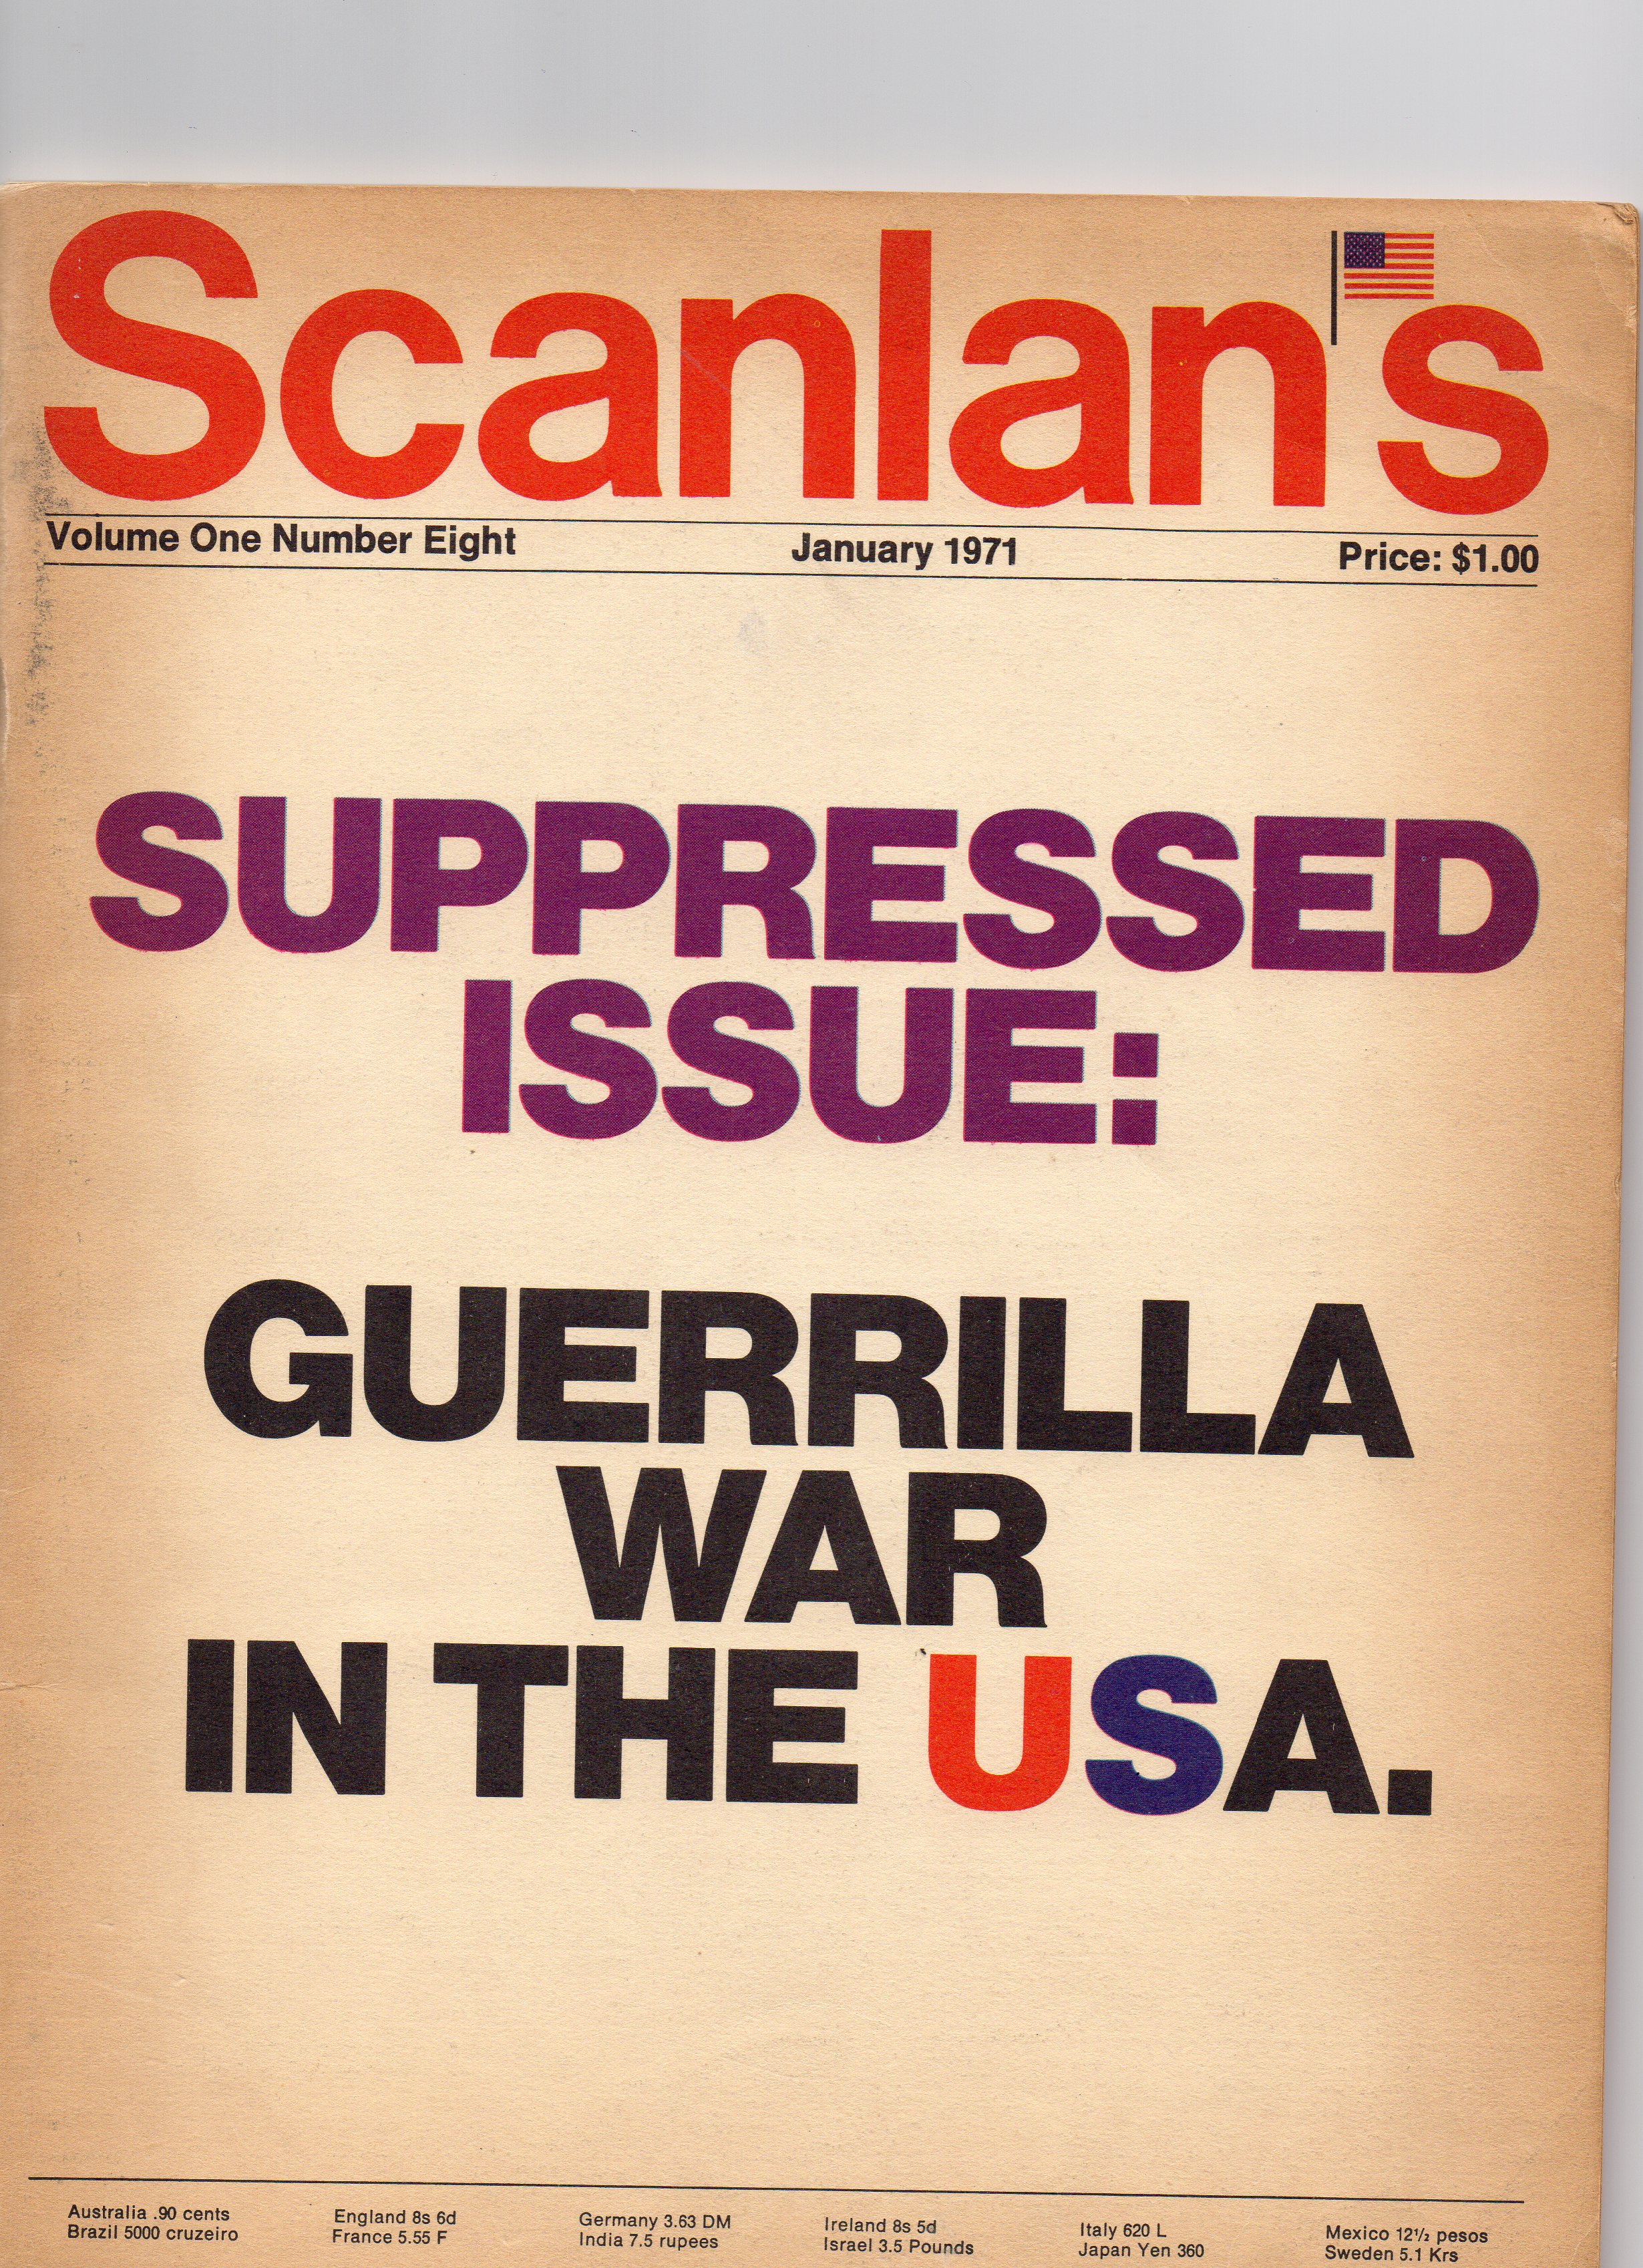 Scanlan’s Monthly 8. This was the last and mostly despicable issue of Scanlan’s in which I had no hand in creating although I was there at the time. The editors explained the date thusly: “This issue, Volume 1, No. 8, is now January 1971, and will appear on the newsstands in early December. Our last issue, Volume 1, No. 7, was dated September and was on newsstands during September. All subscribers will receive twelve full issues during the term of their subscription.” Subscribers ate their hearts out. The magazine folded and I was out of work. From my personal collection.